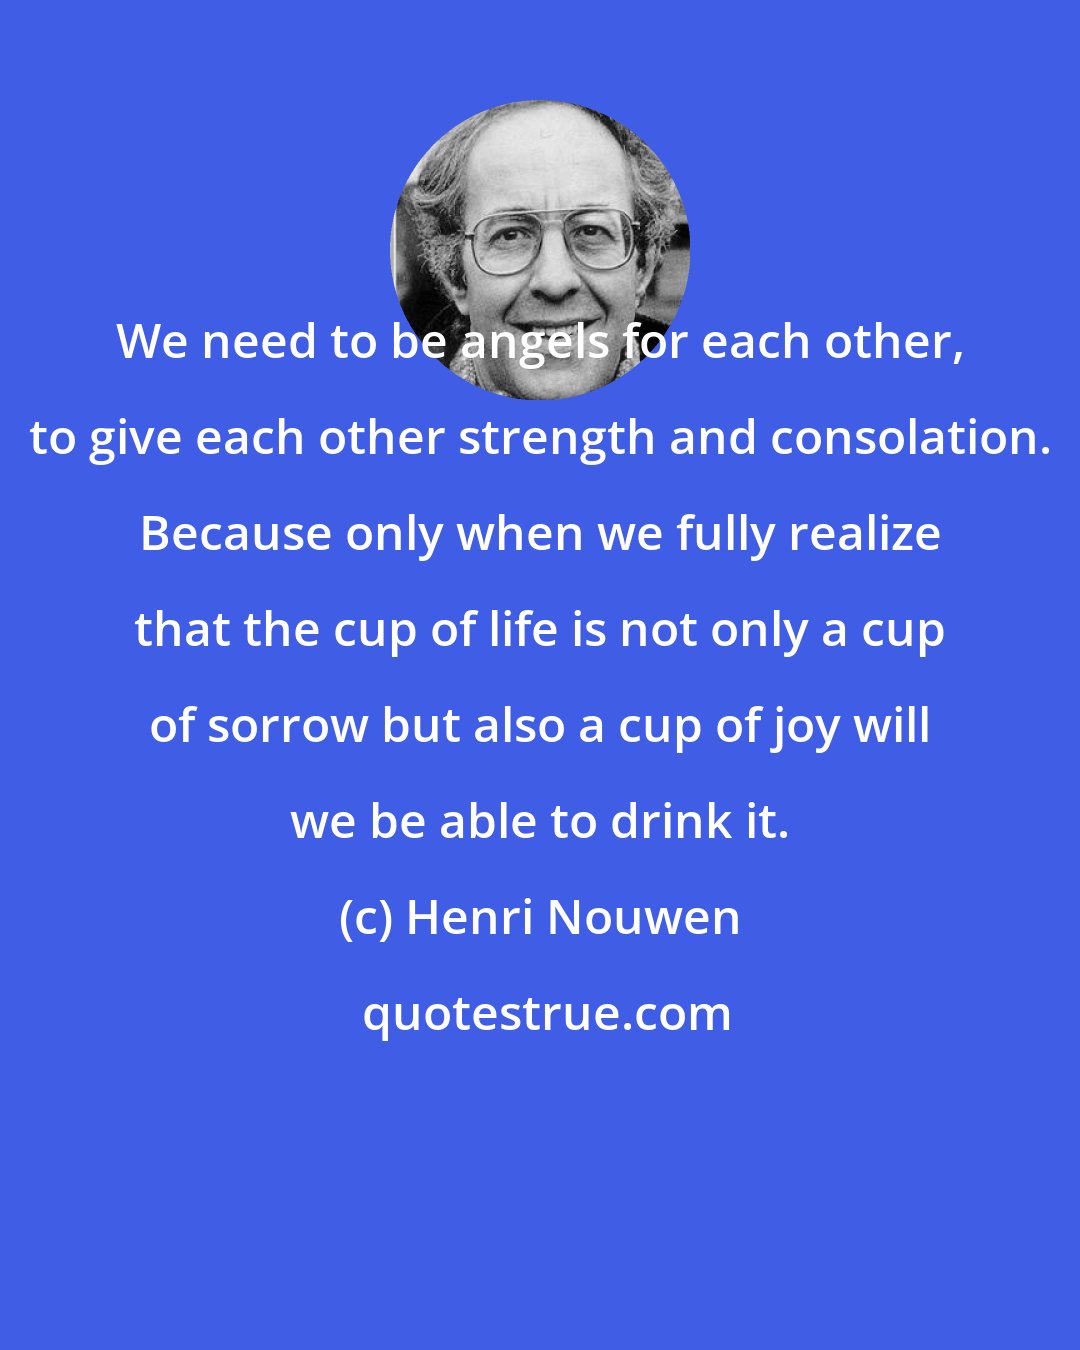 Henri Nouwen: We need to be angels for each other, to give each other strength and consolation. Because only when we fully realize that the cup of life is not only a cup of sorrow but also a cup of joy will we be able to drink it.